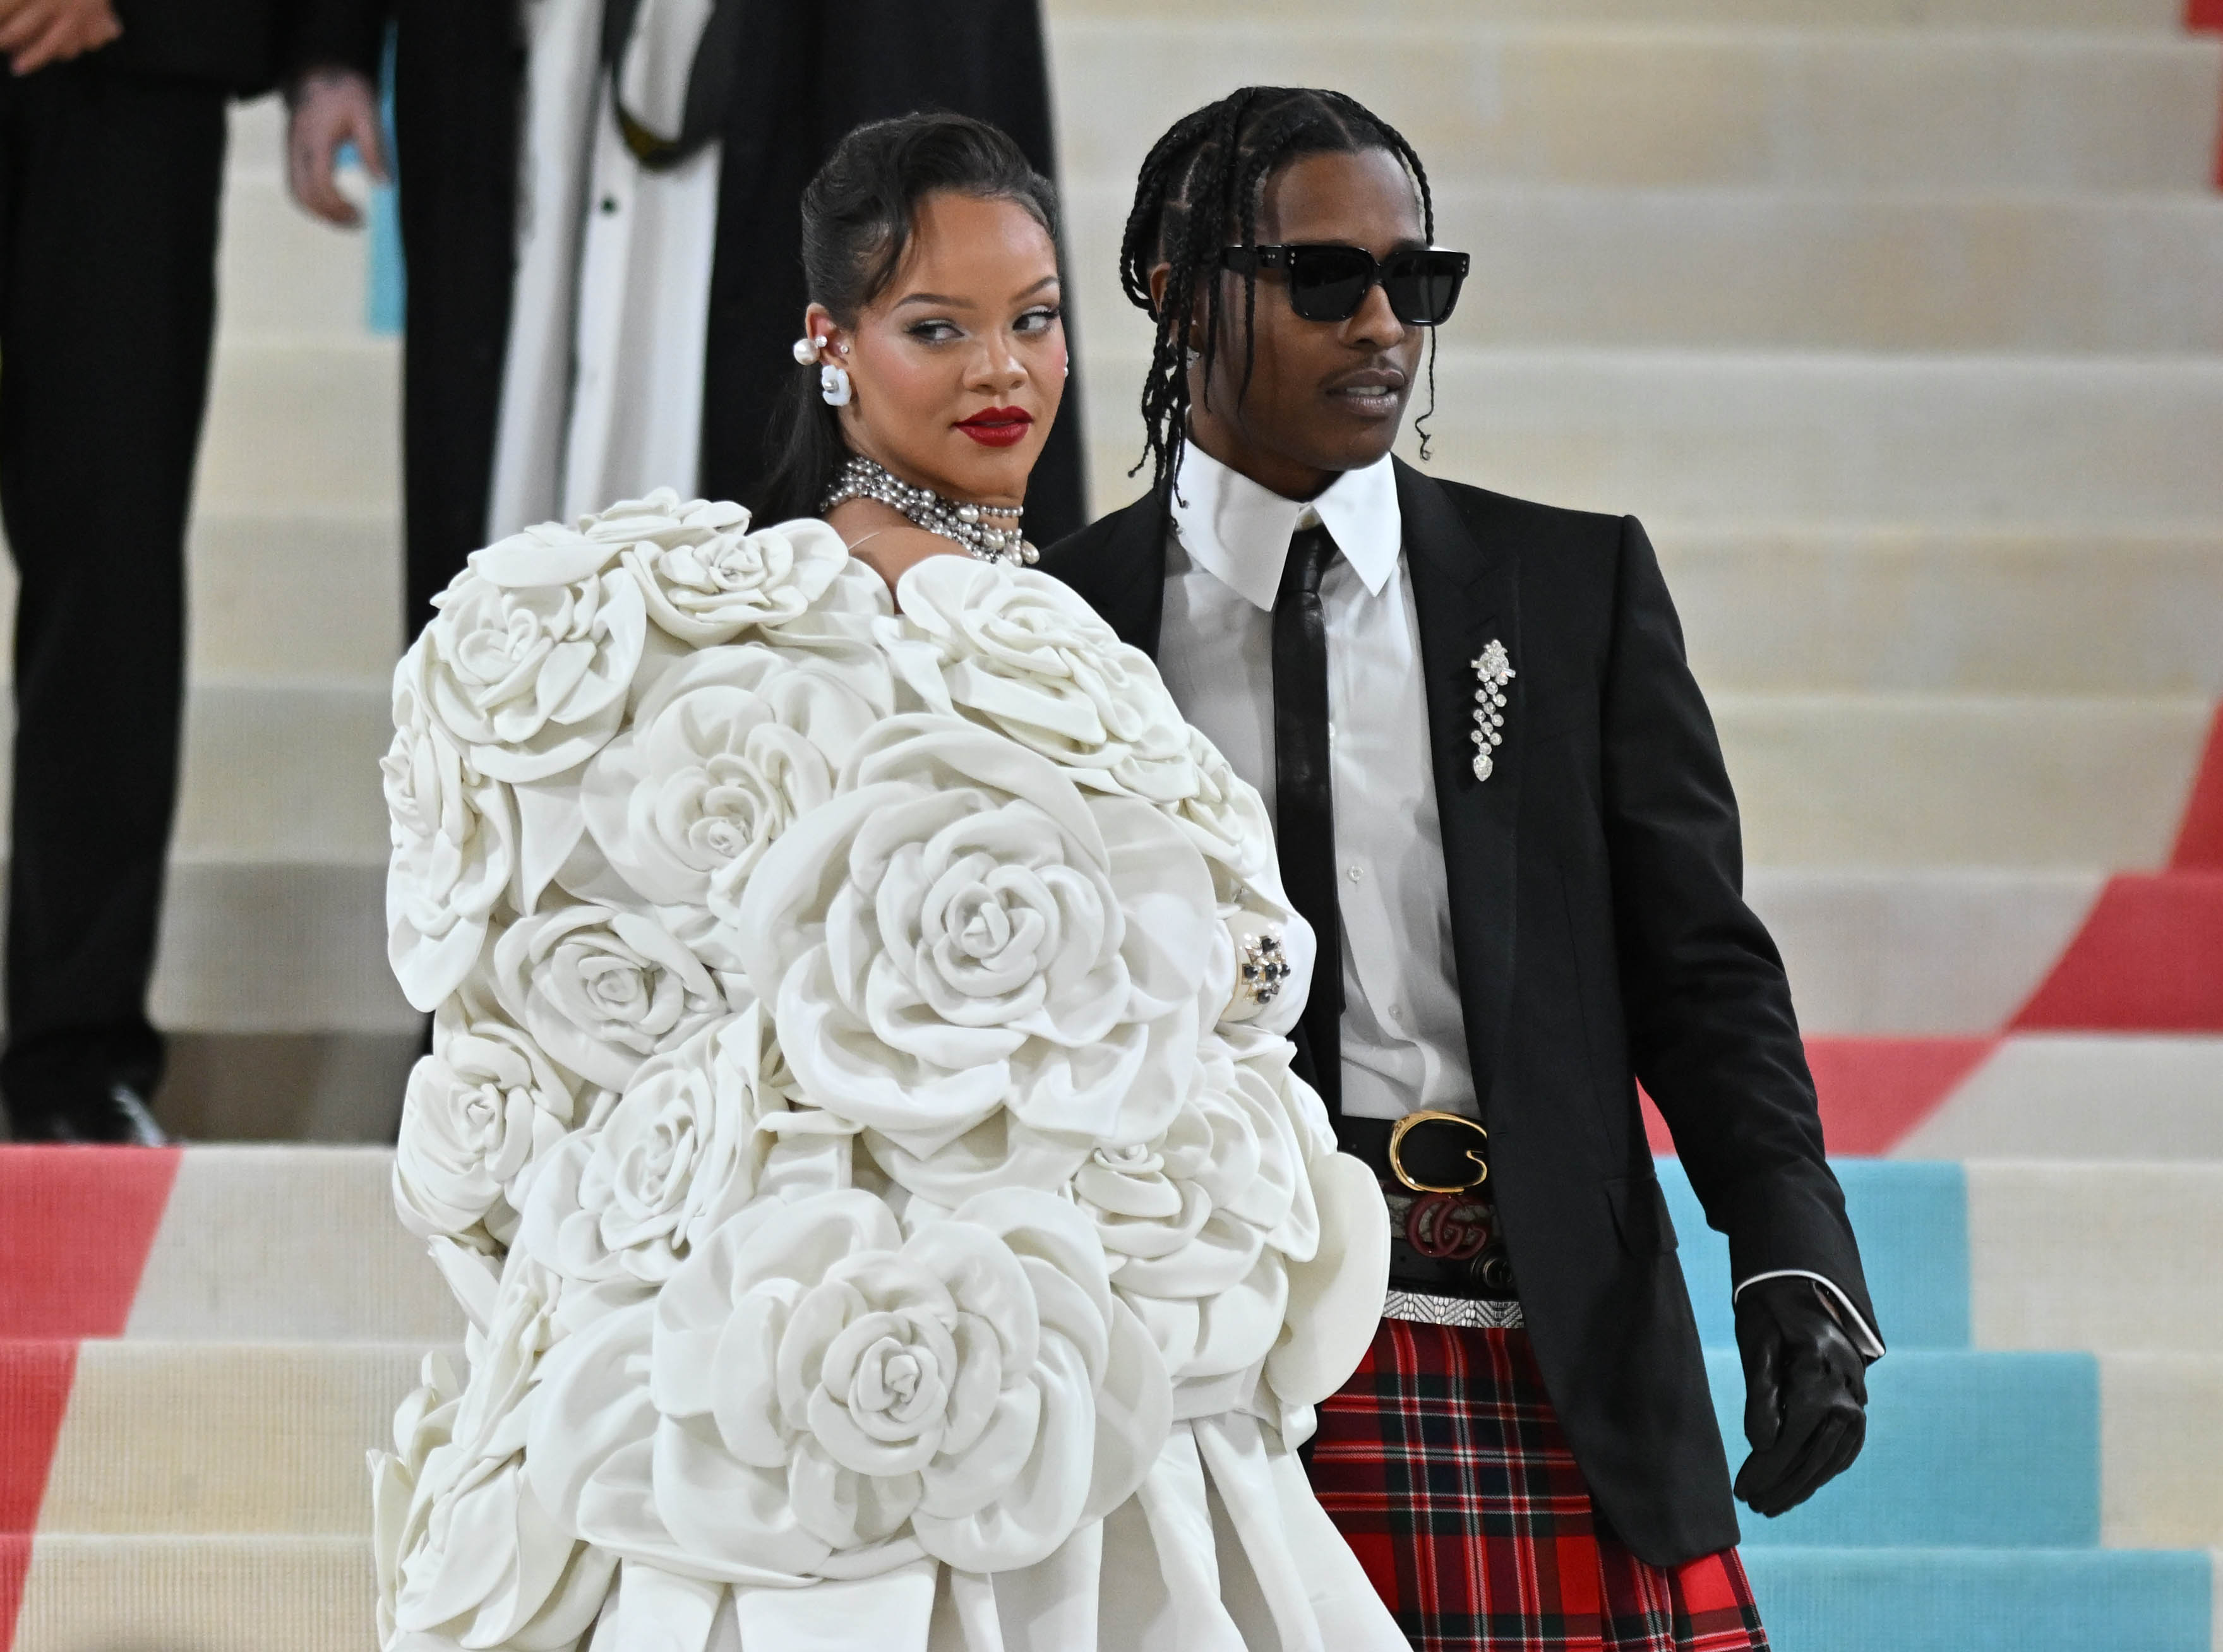 ASAP Rocky and Rihanna at the 2023 Met Gala on May 1, 2023 in New York City. | Source: Getty Images